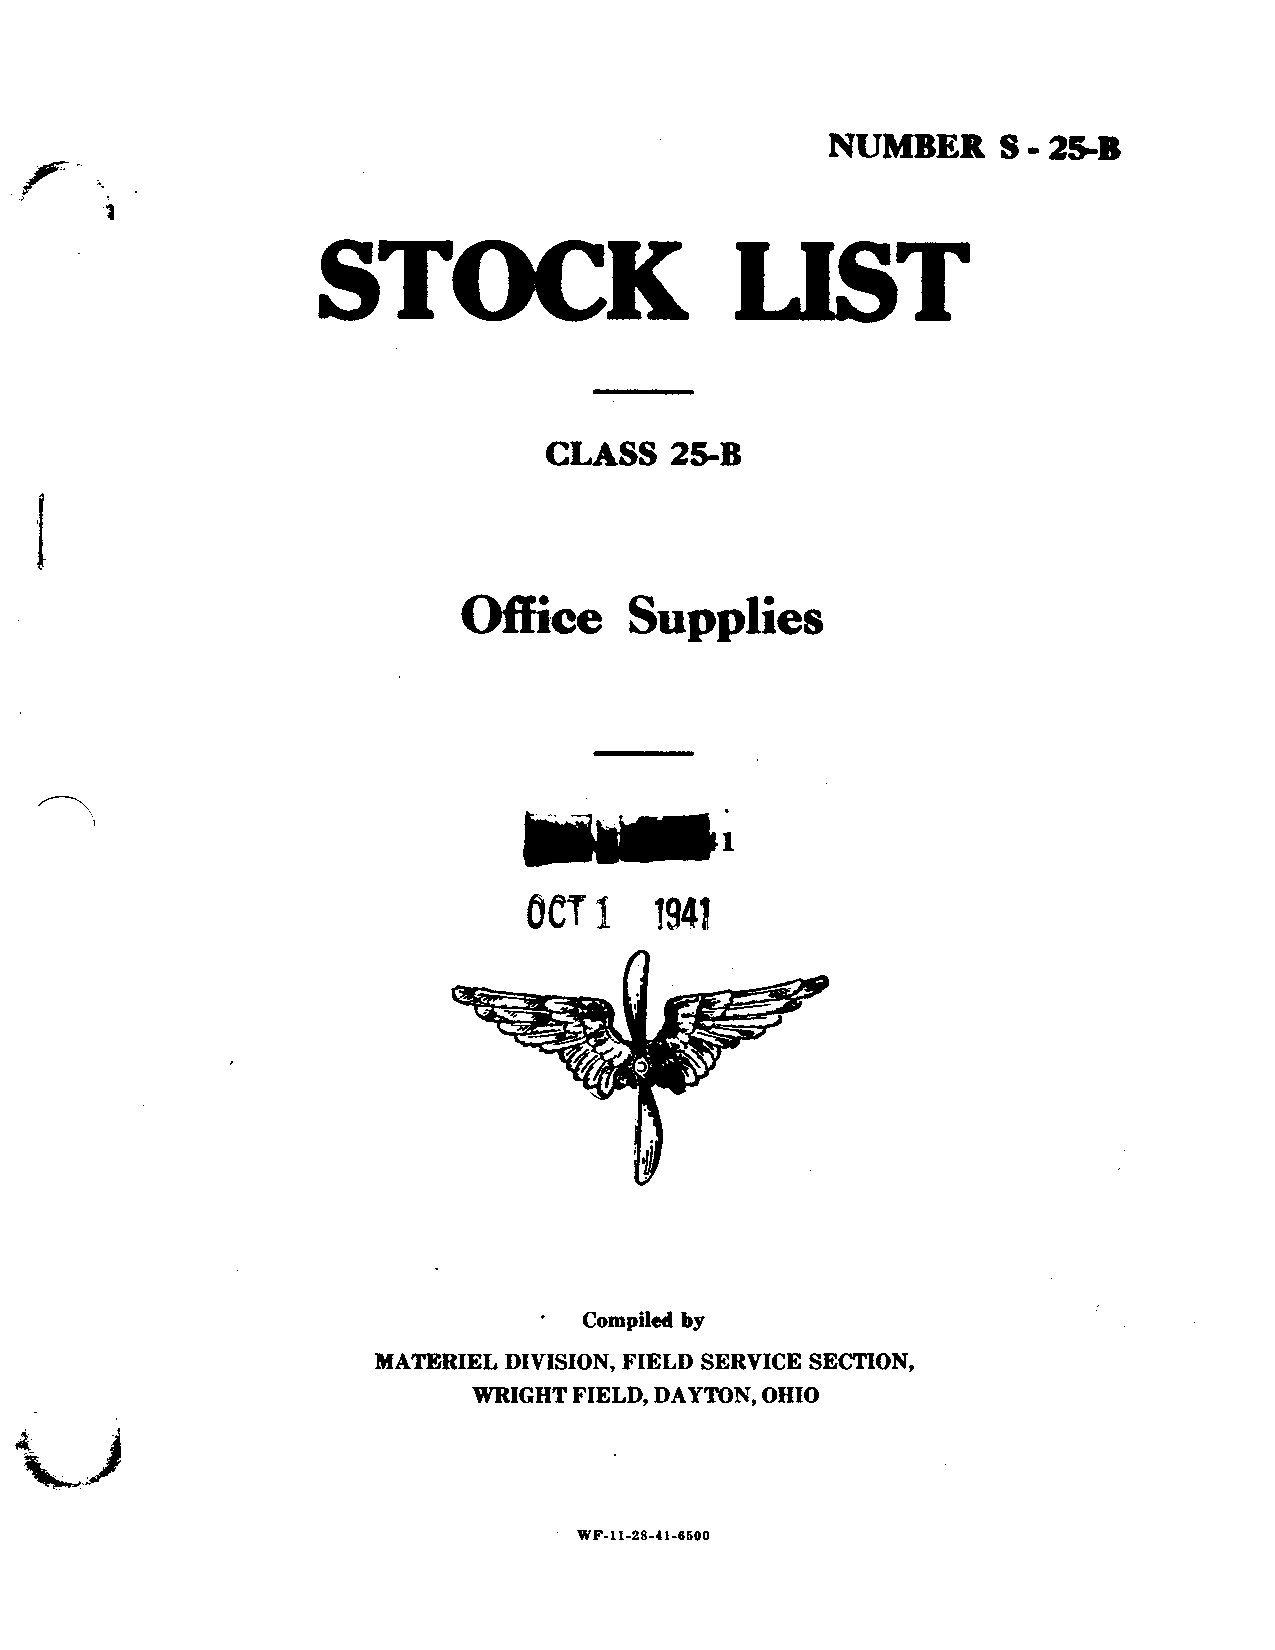 Sample page 1 from AirCorps Library document: Stock List for Office Supplies